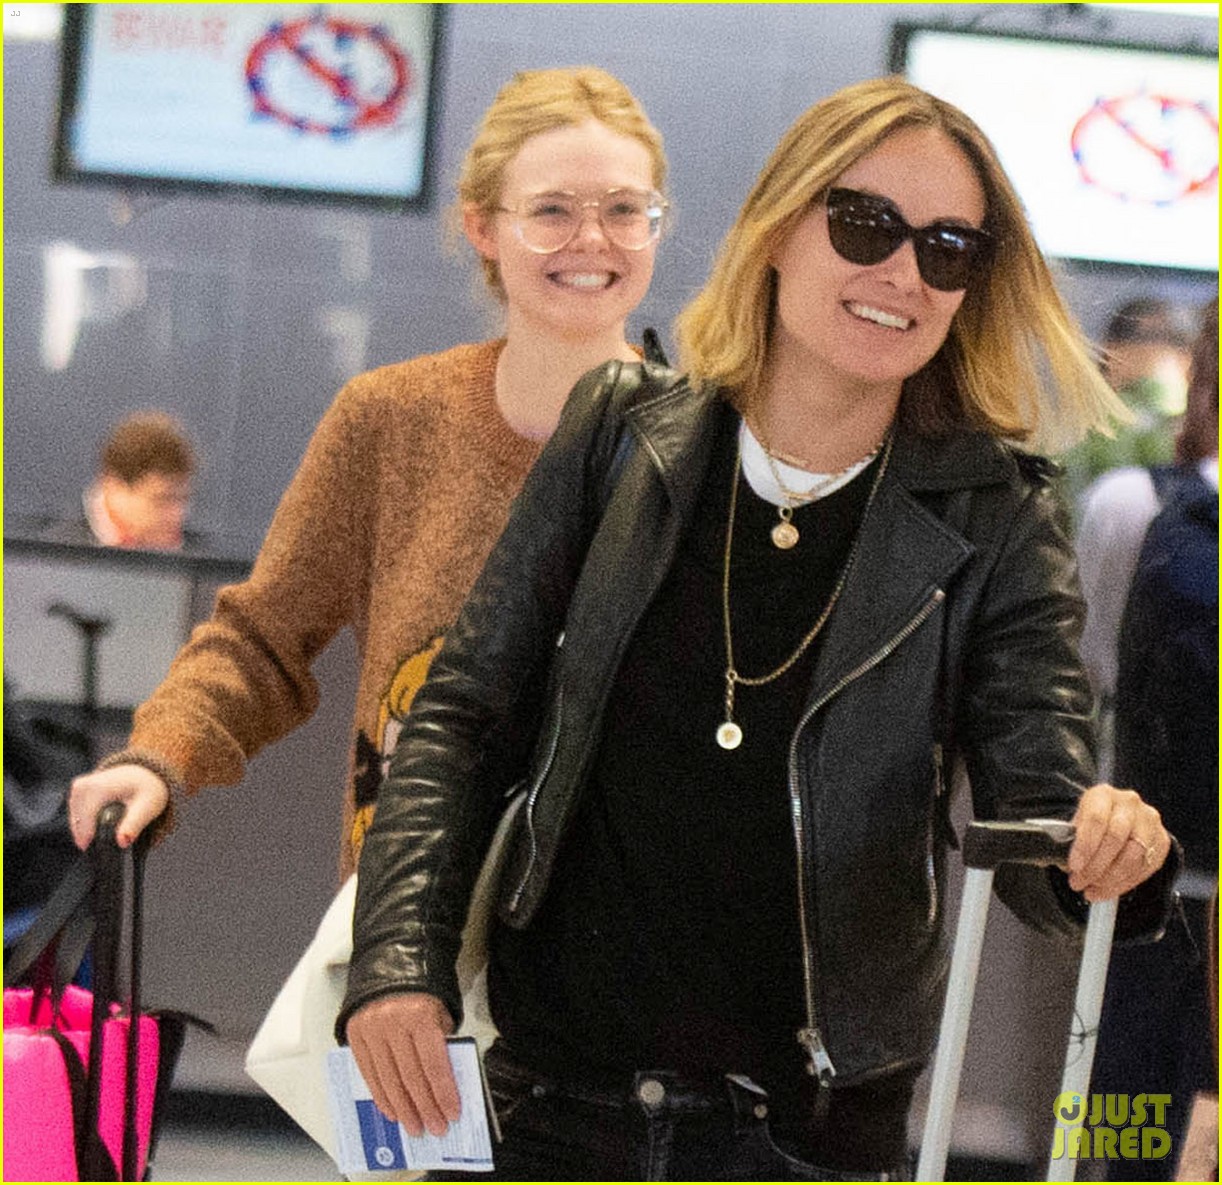 elle fanning and olivia wilde share a laugh at jfk airport with jason sudeikis05